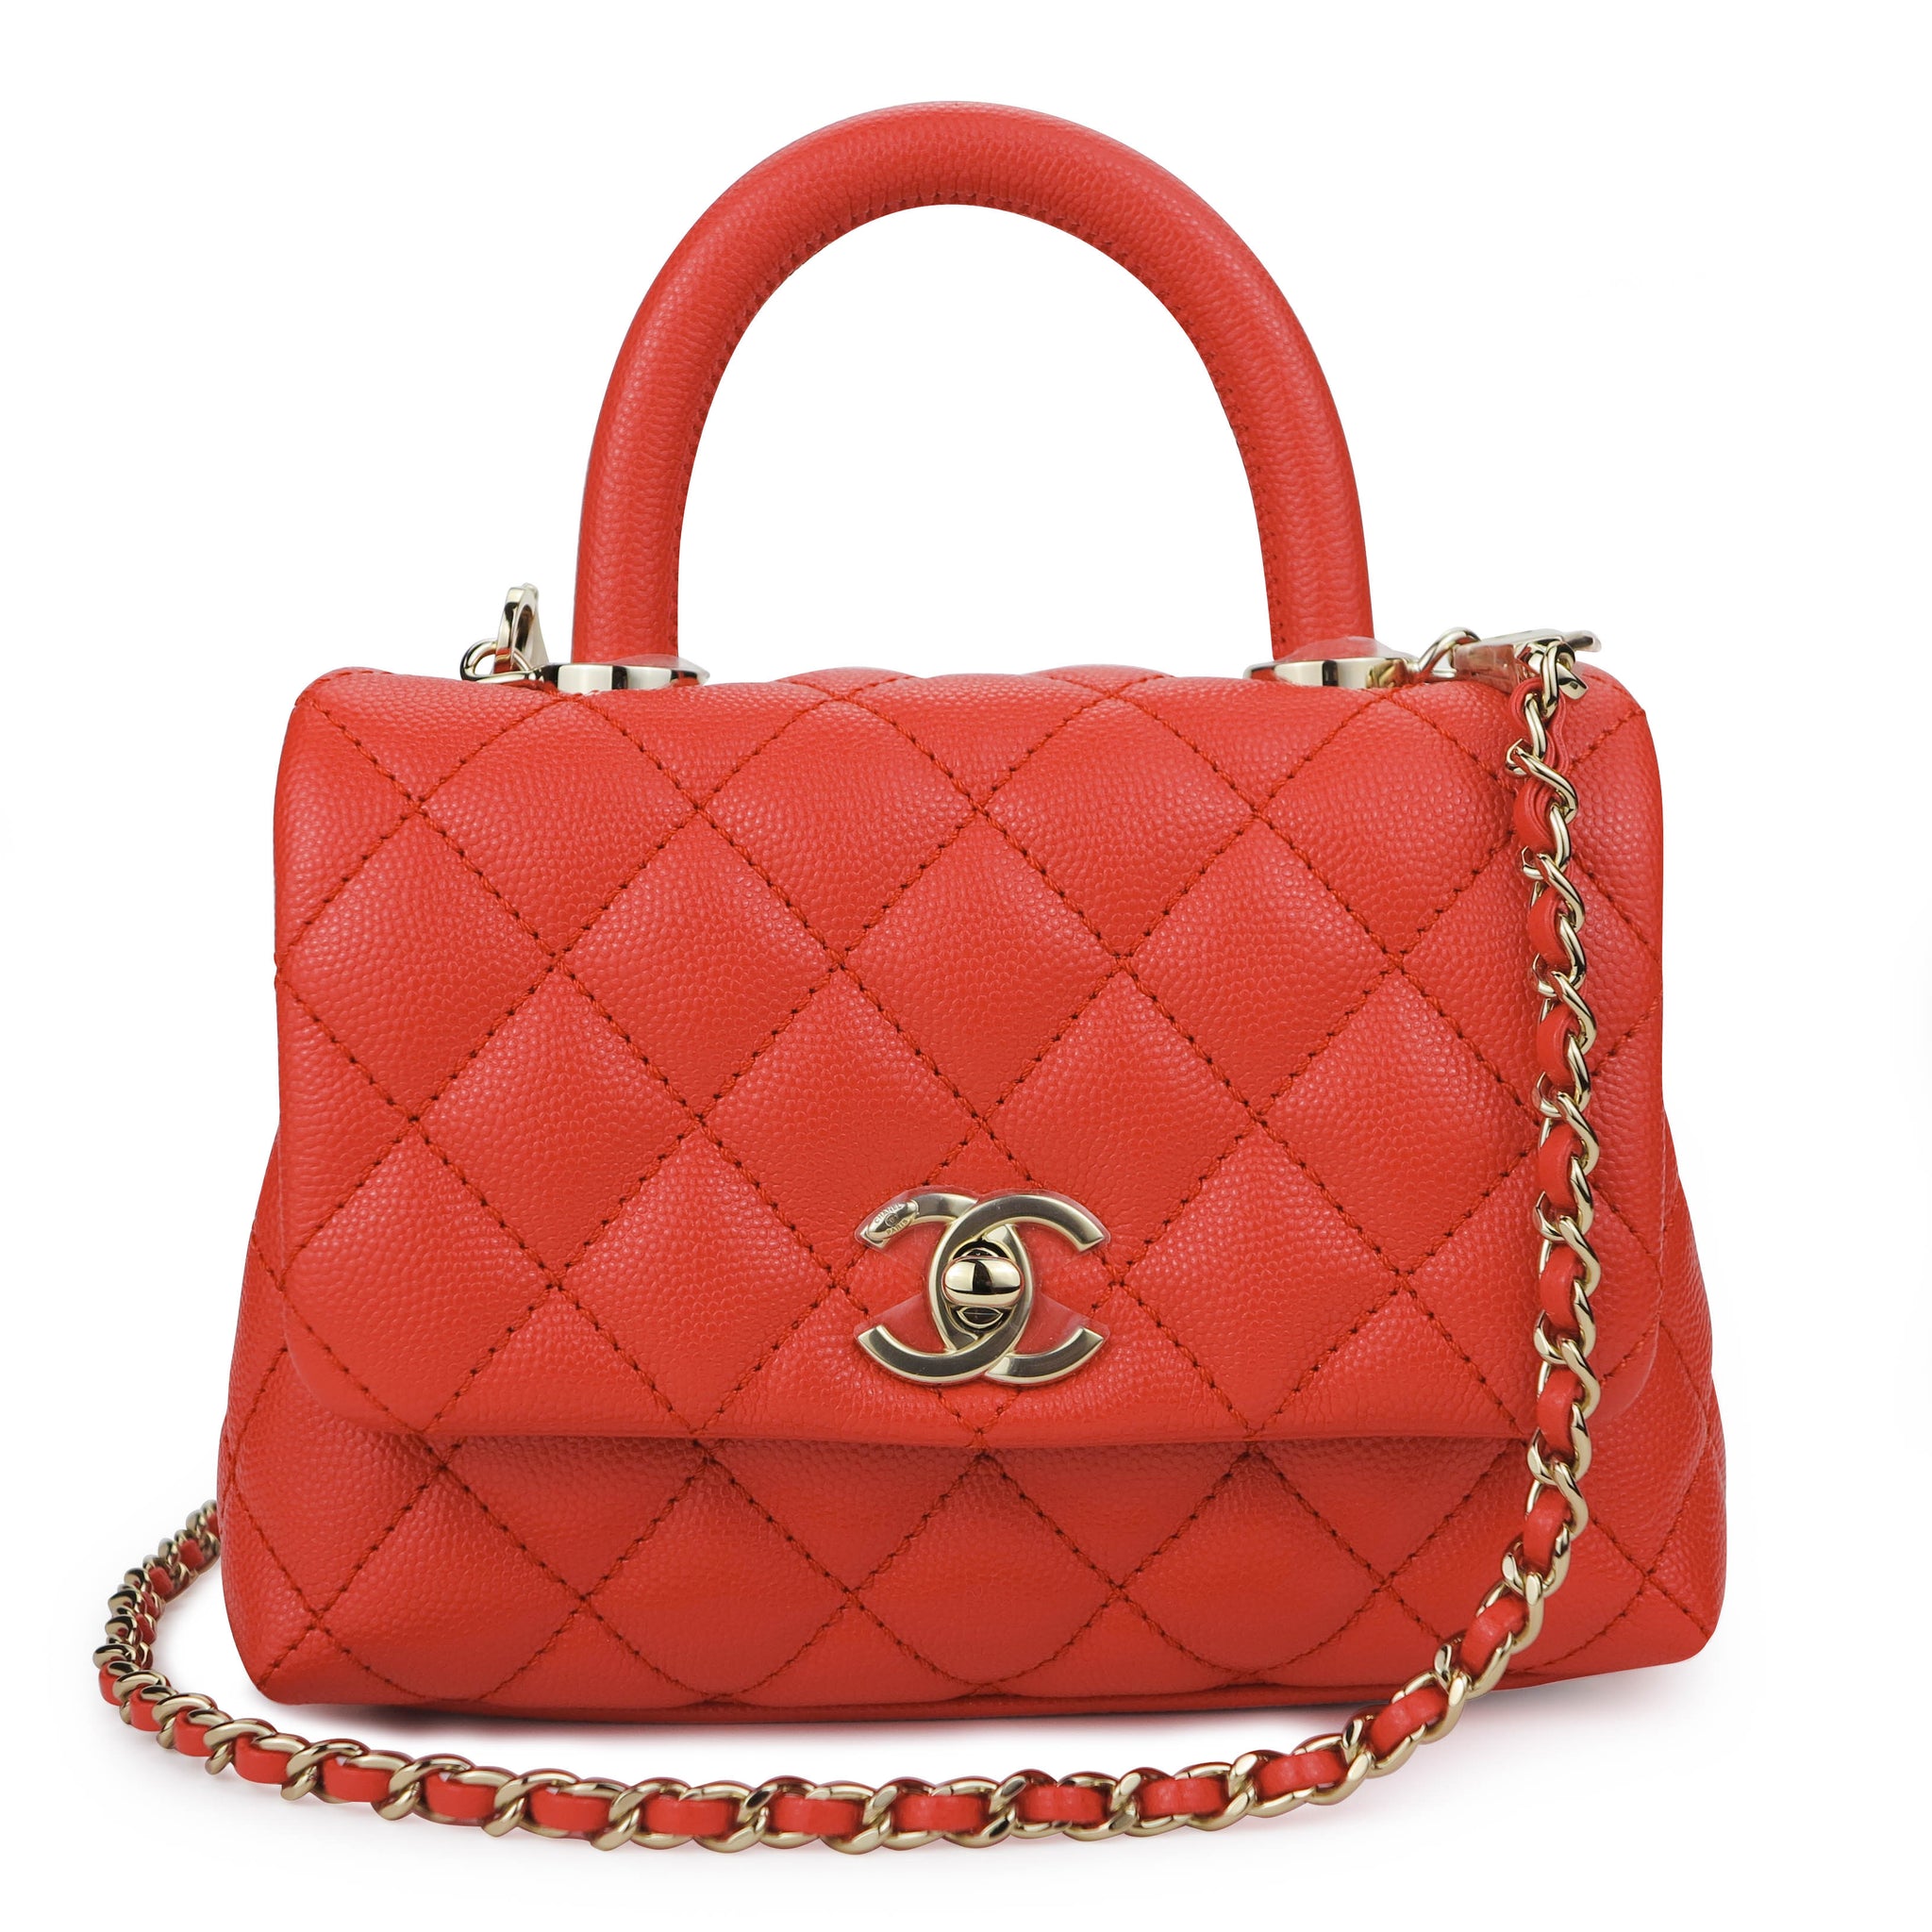 Chanel Mini Coco Handle Flap Bag In Coral Red Caviar Dearluxe